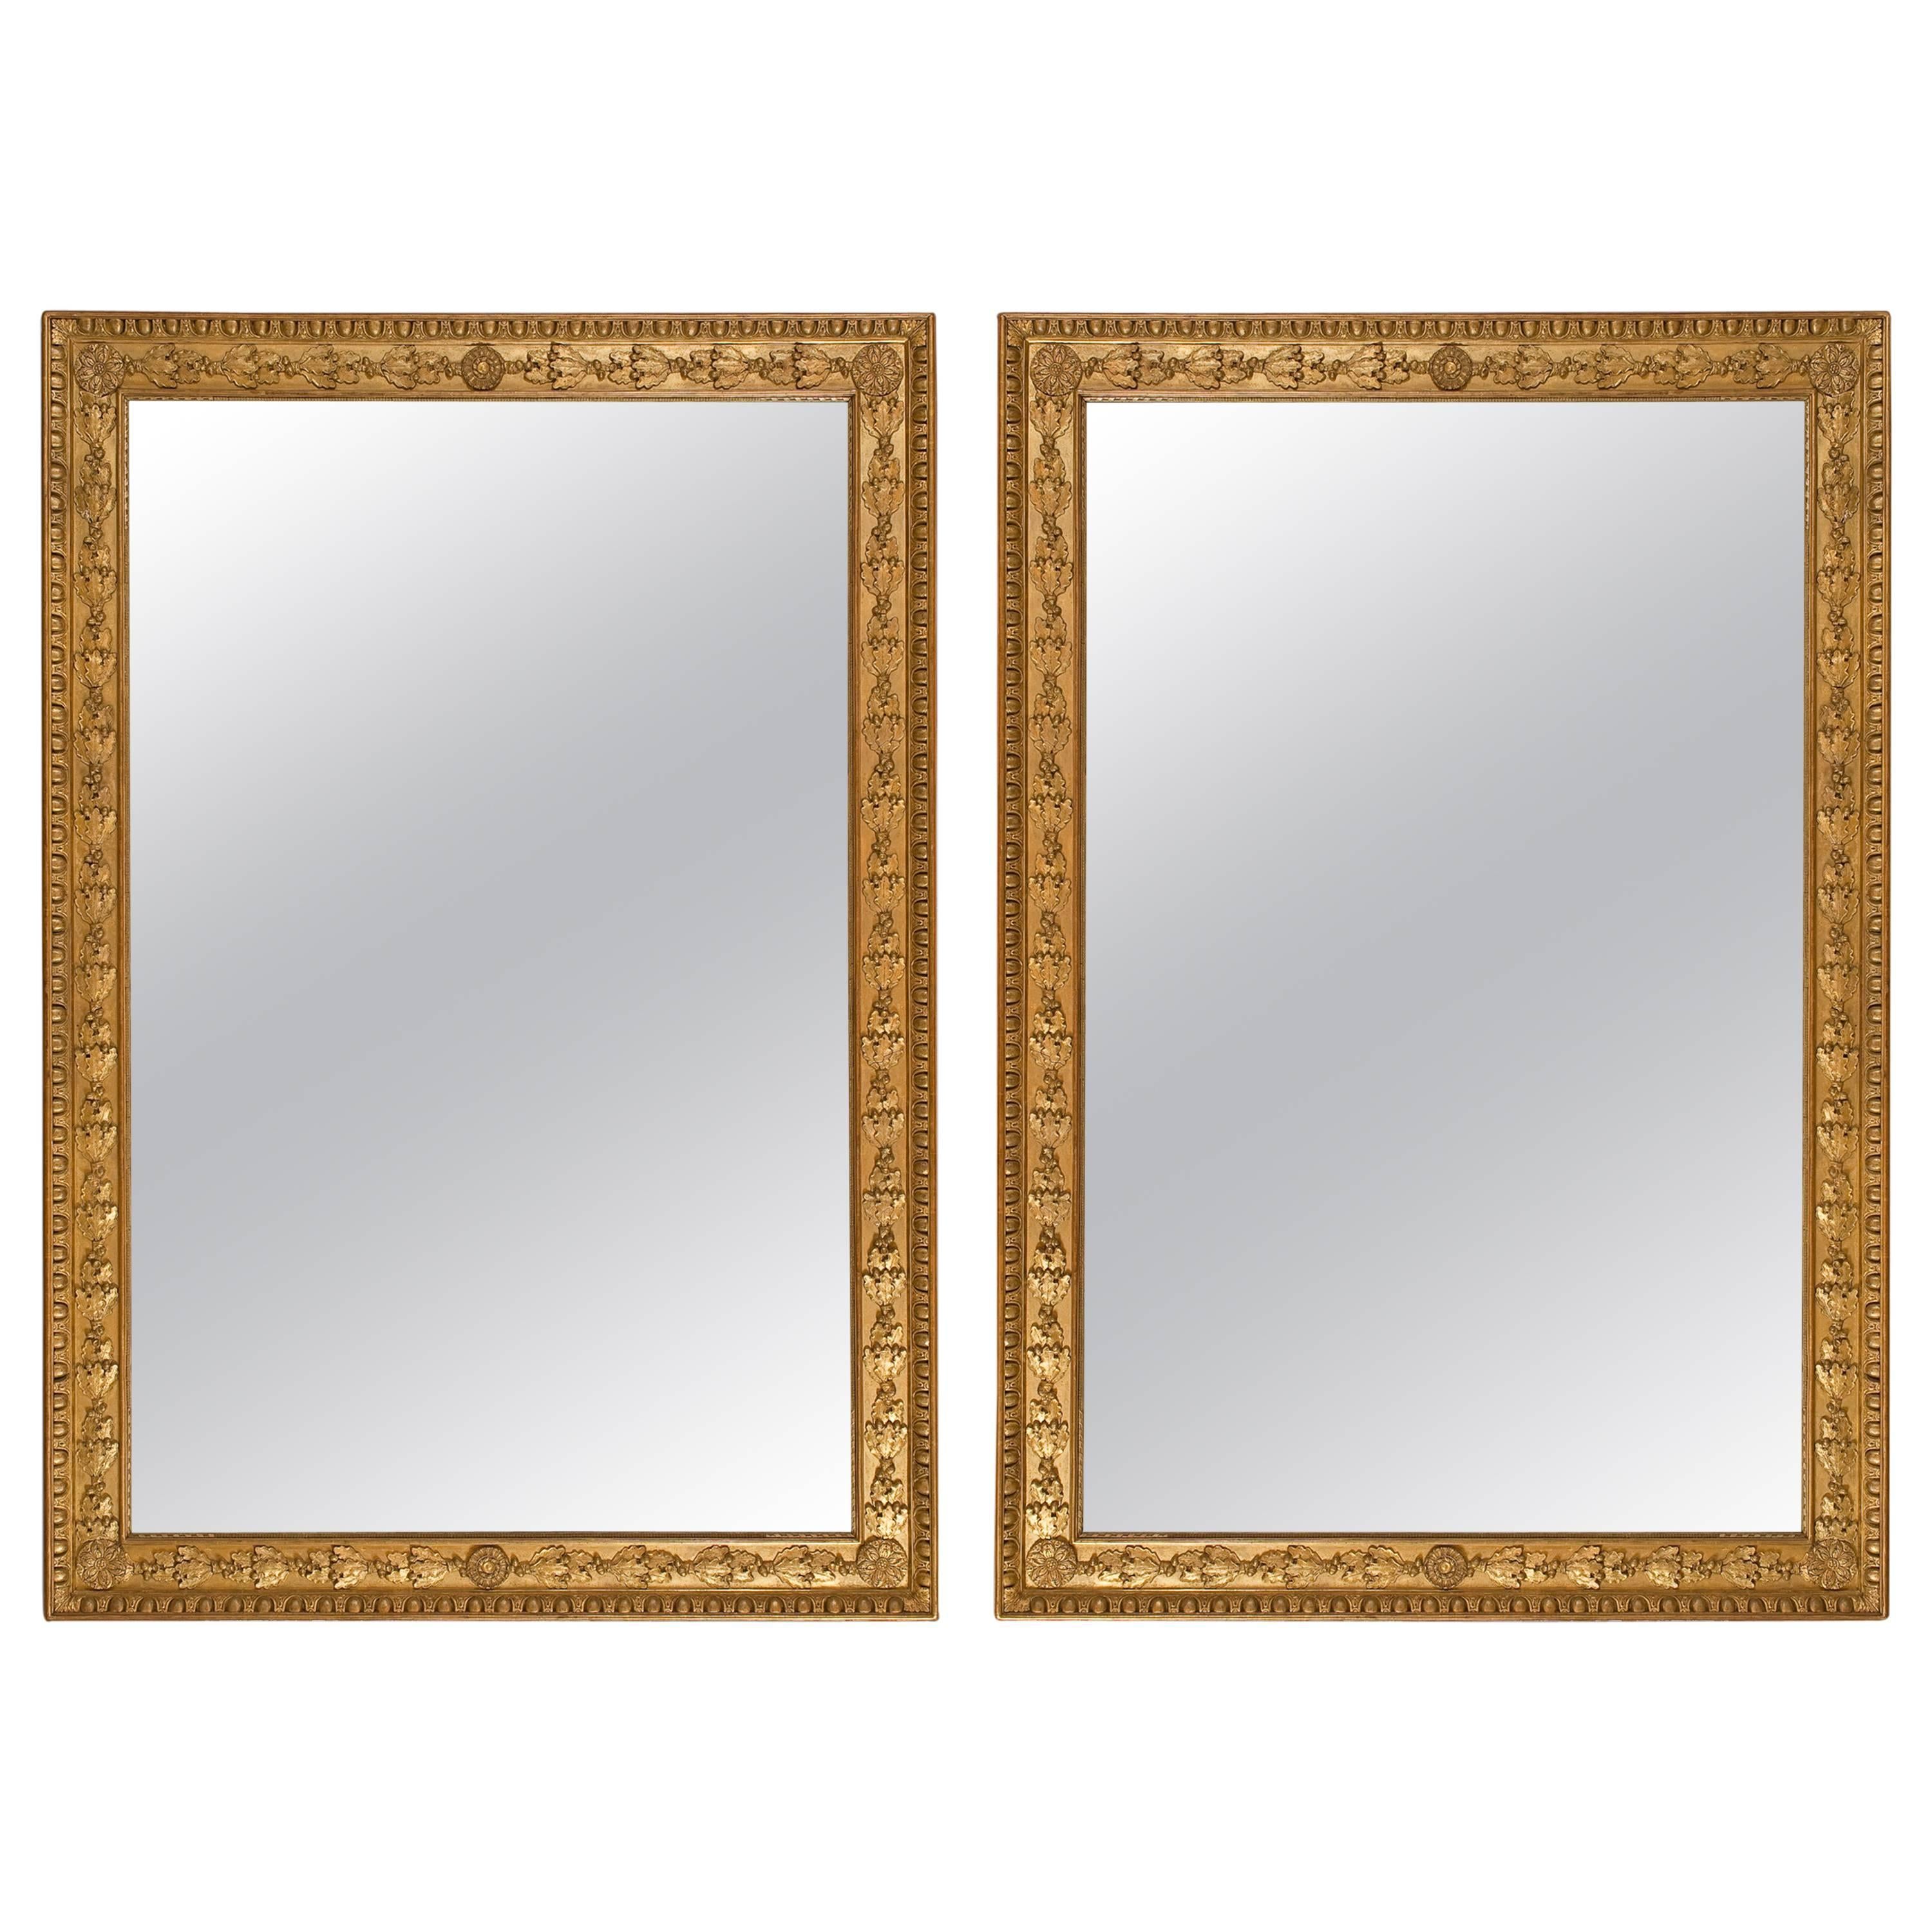 French Gilt Mirrors, Early 19th Century For Sale